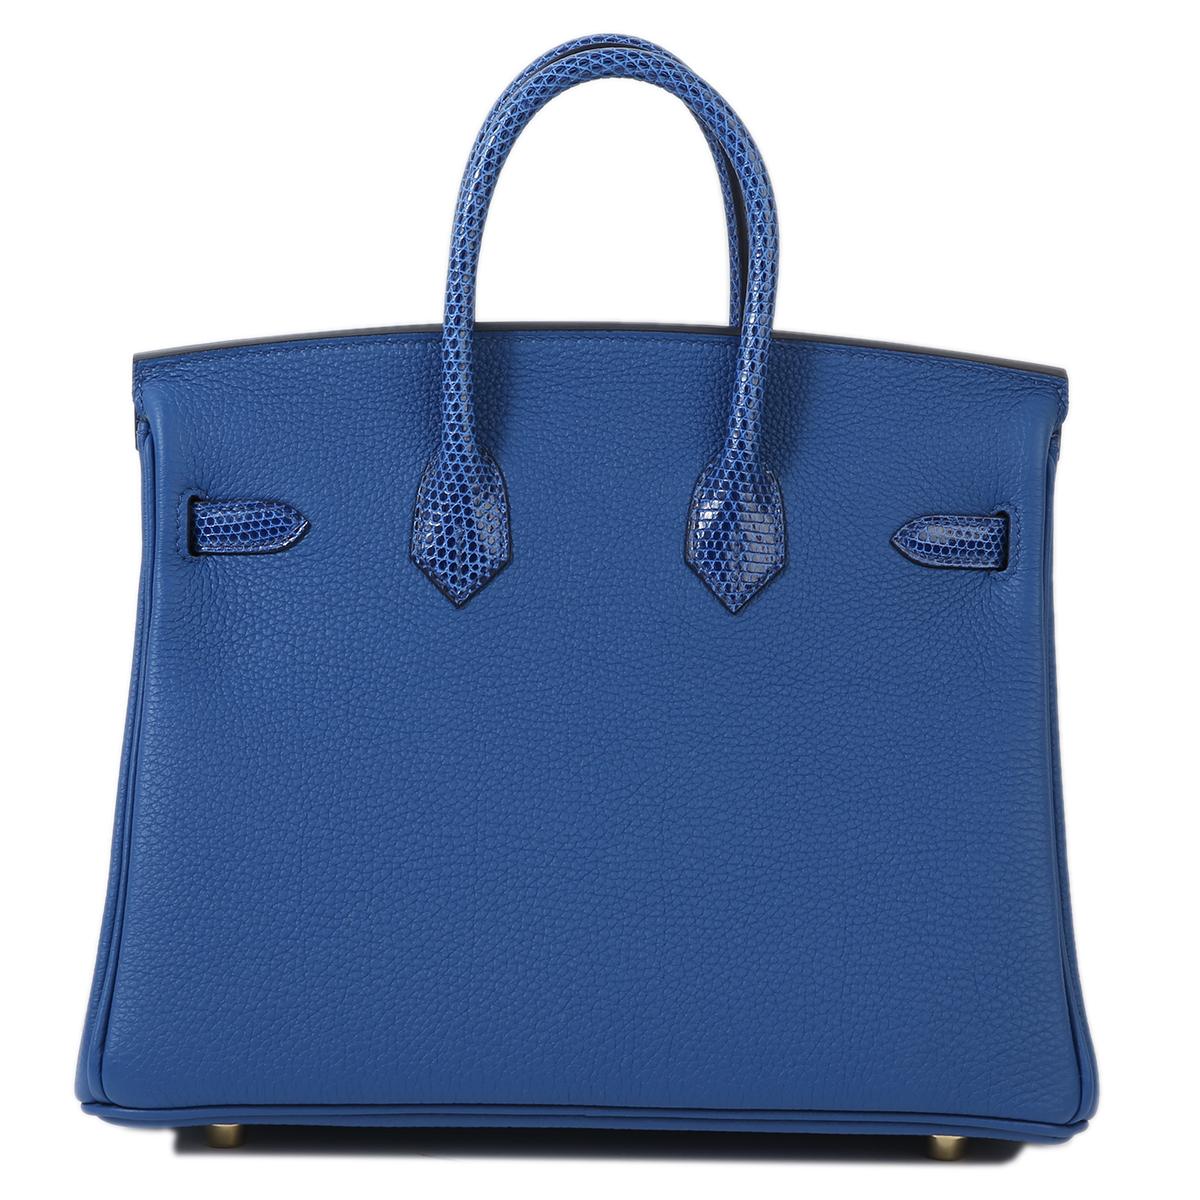 HERMÈS NEW Birkin 25 Touch Blue Lizard Exotic Togo Leather Top Handle Tote Bag 1